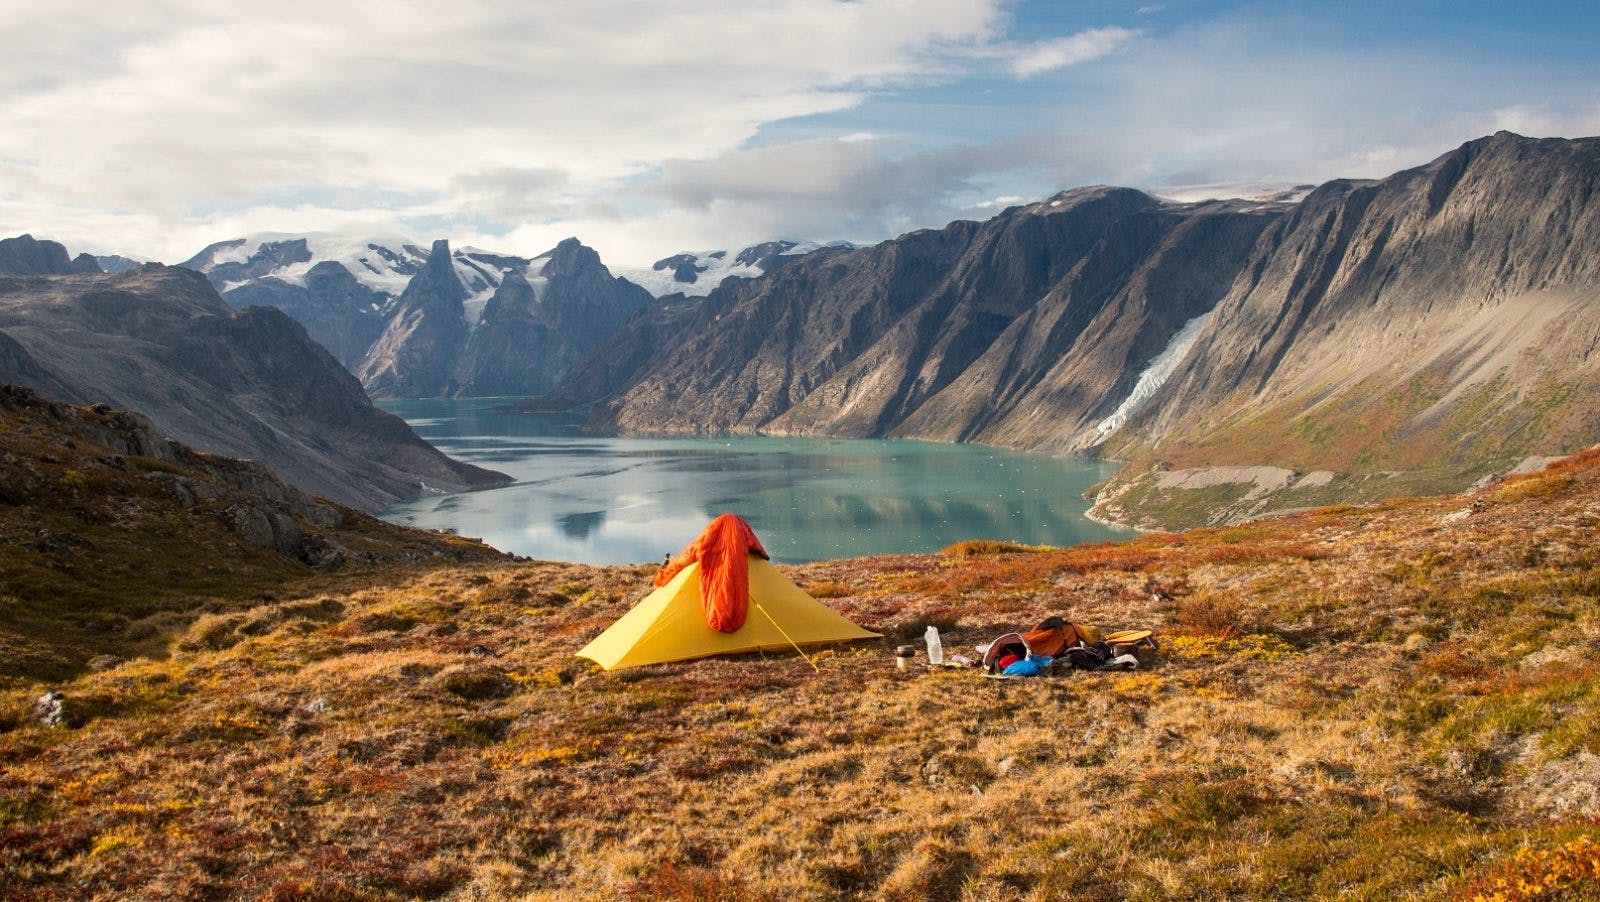 Splendid viby spot during a 5-week solo adventure in West-Greenland.